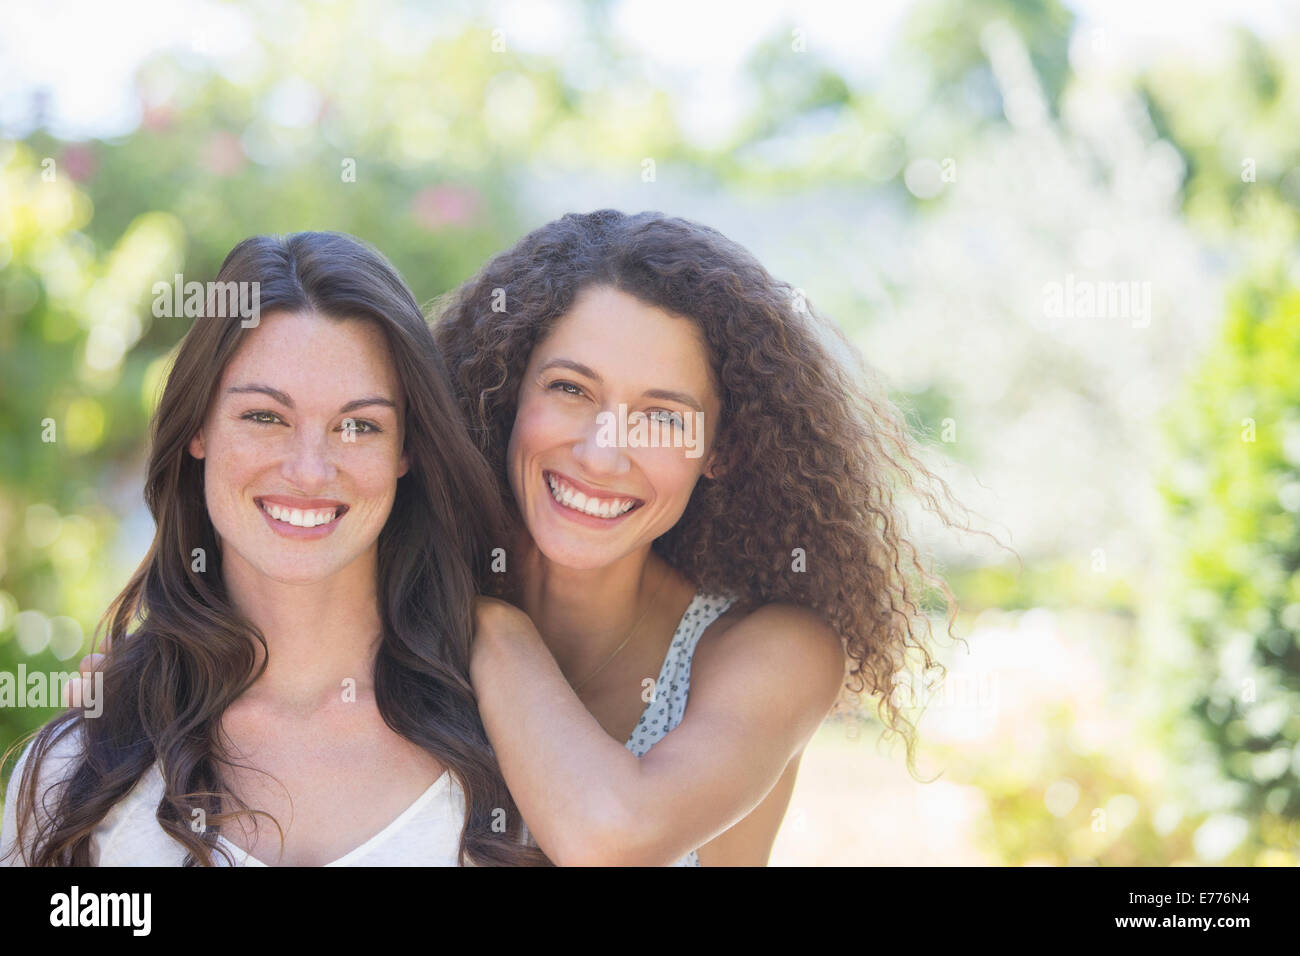 Sisters smiling together outdoors Stock Photo